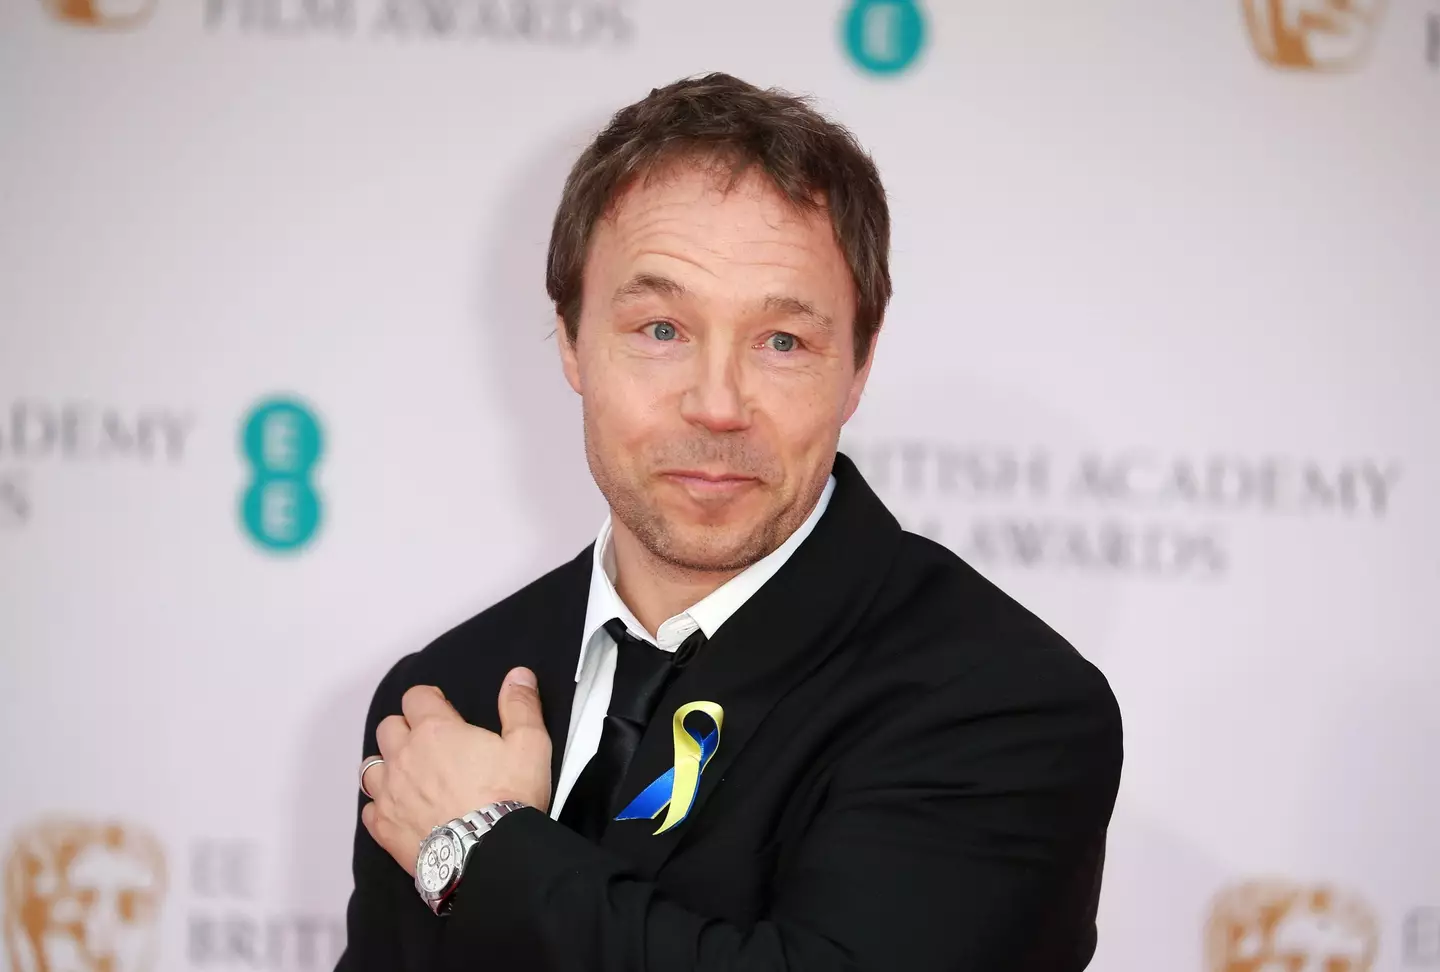 A new drama starring Stephen Graham is coming to Netflix soon.